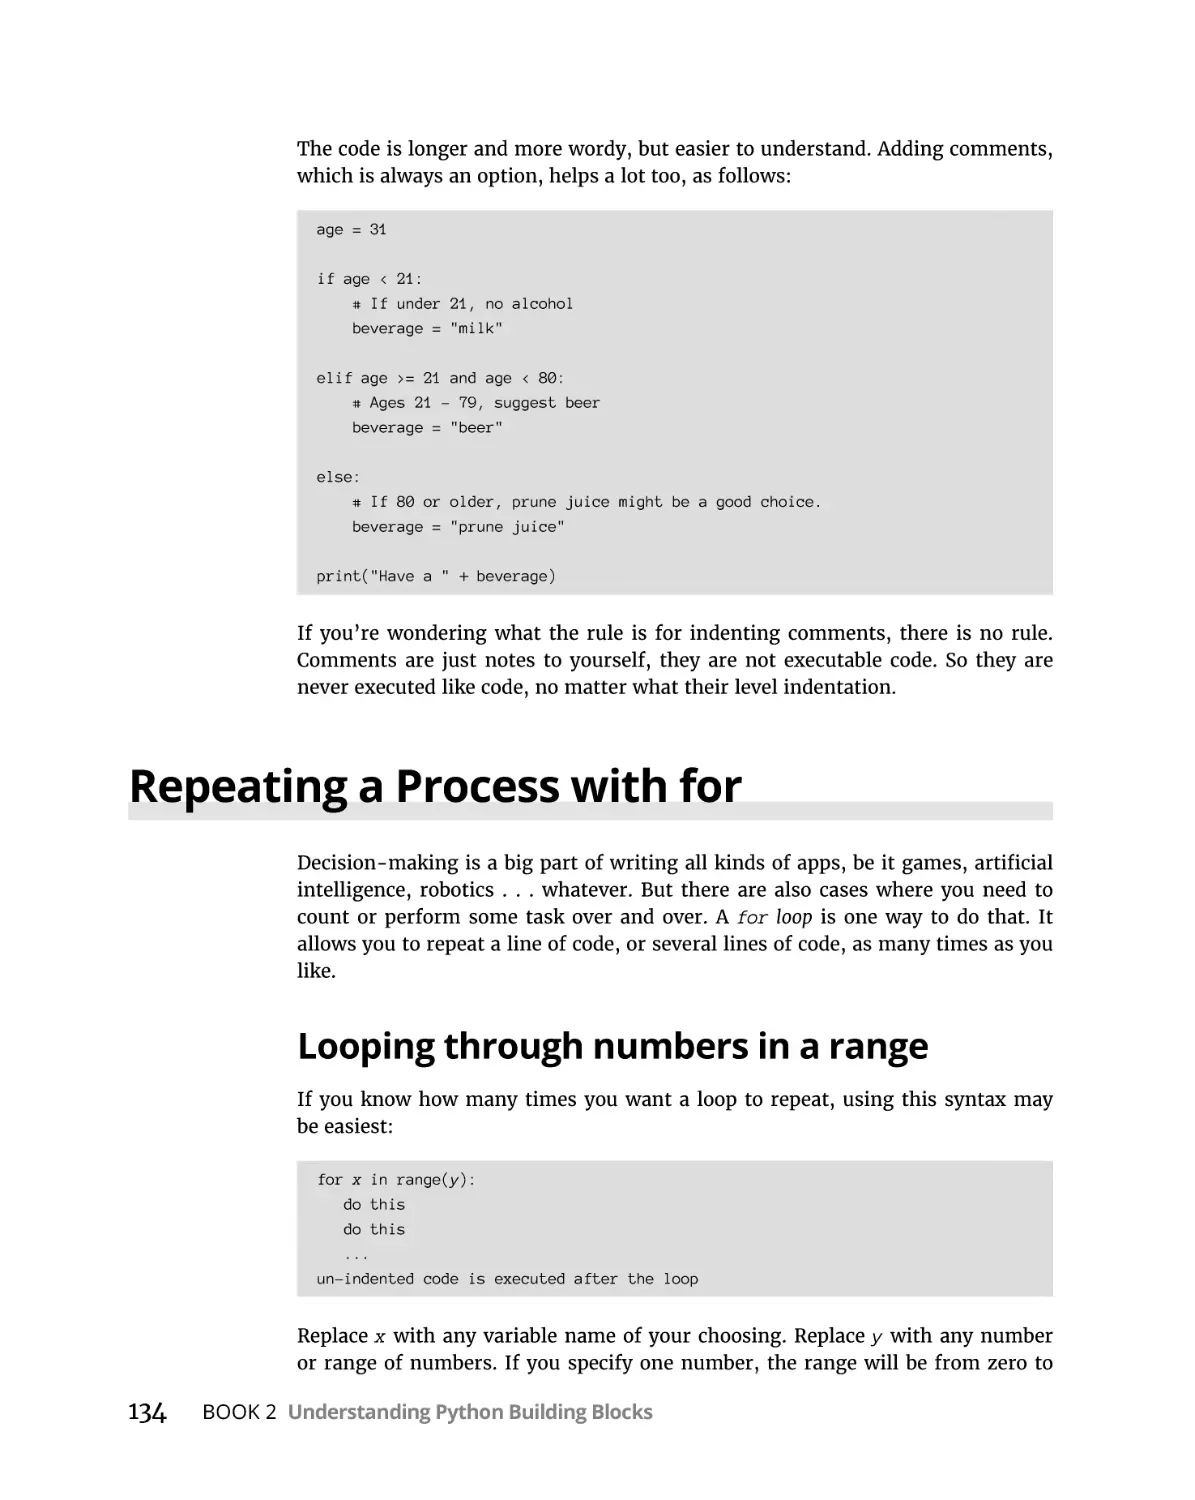 Repeating a Process with for
Looping through numbers in a range